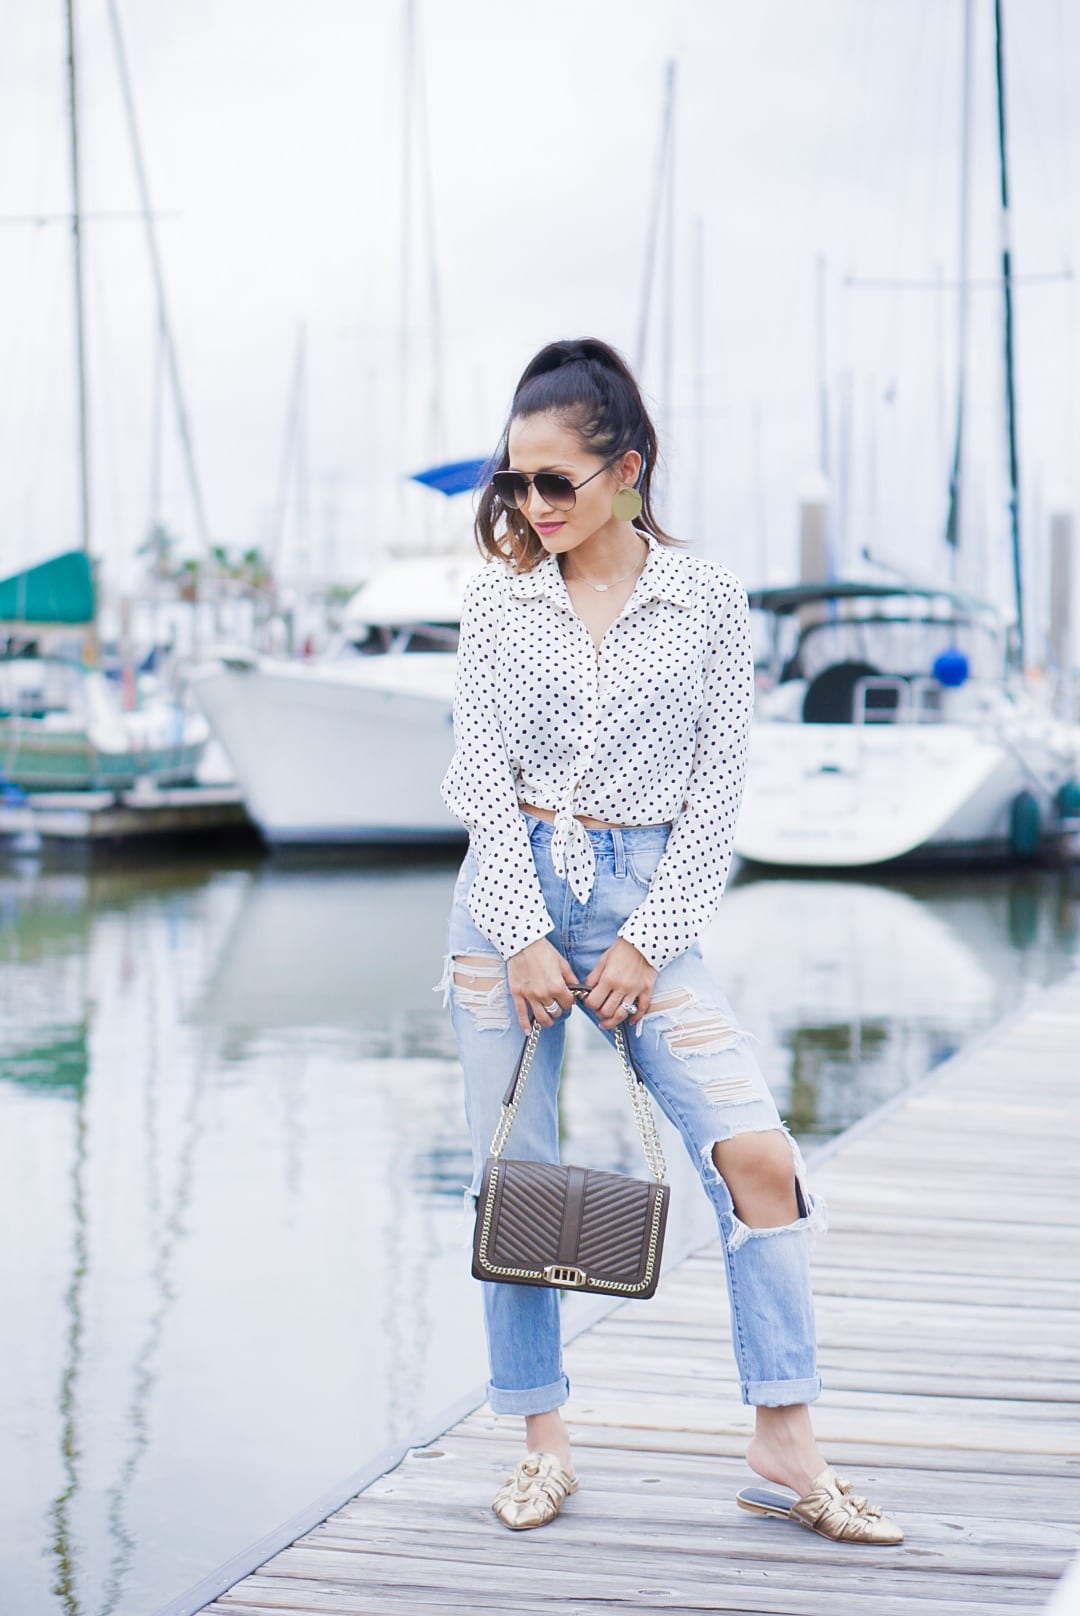 coping tips, dealing with a tragedy, dealing with grief, mom guilt, #polkadot #summerstyle, quay sunglasses, #momstyle, Rebecca Minkoff shoes, gold mules, Rebecca Minkoff love crossbody, quay sunglasses, ripped ankle jeans, mom jeans, high waisted jeans 